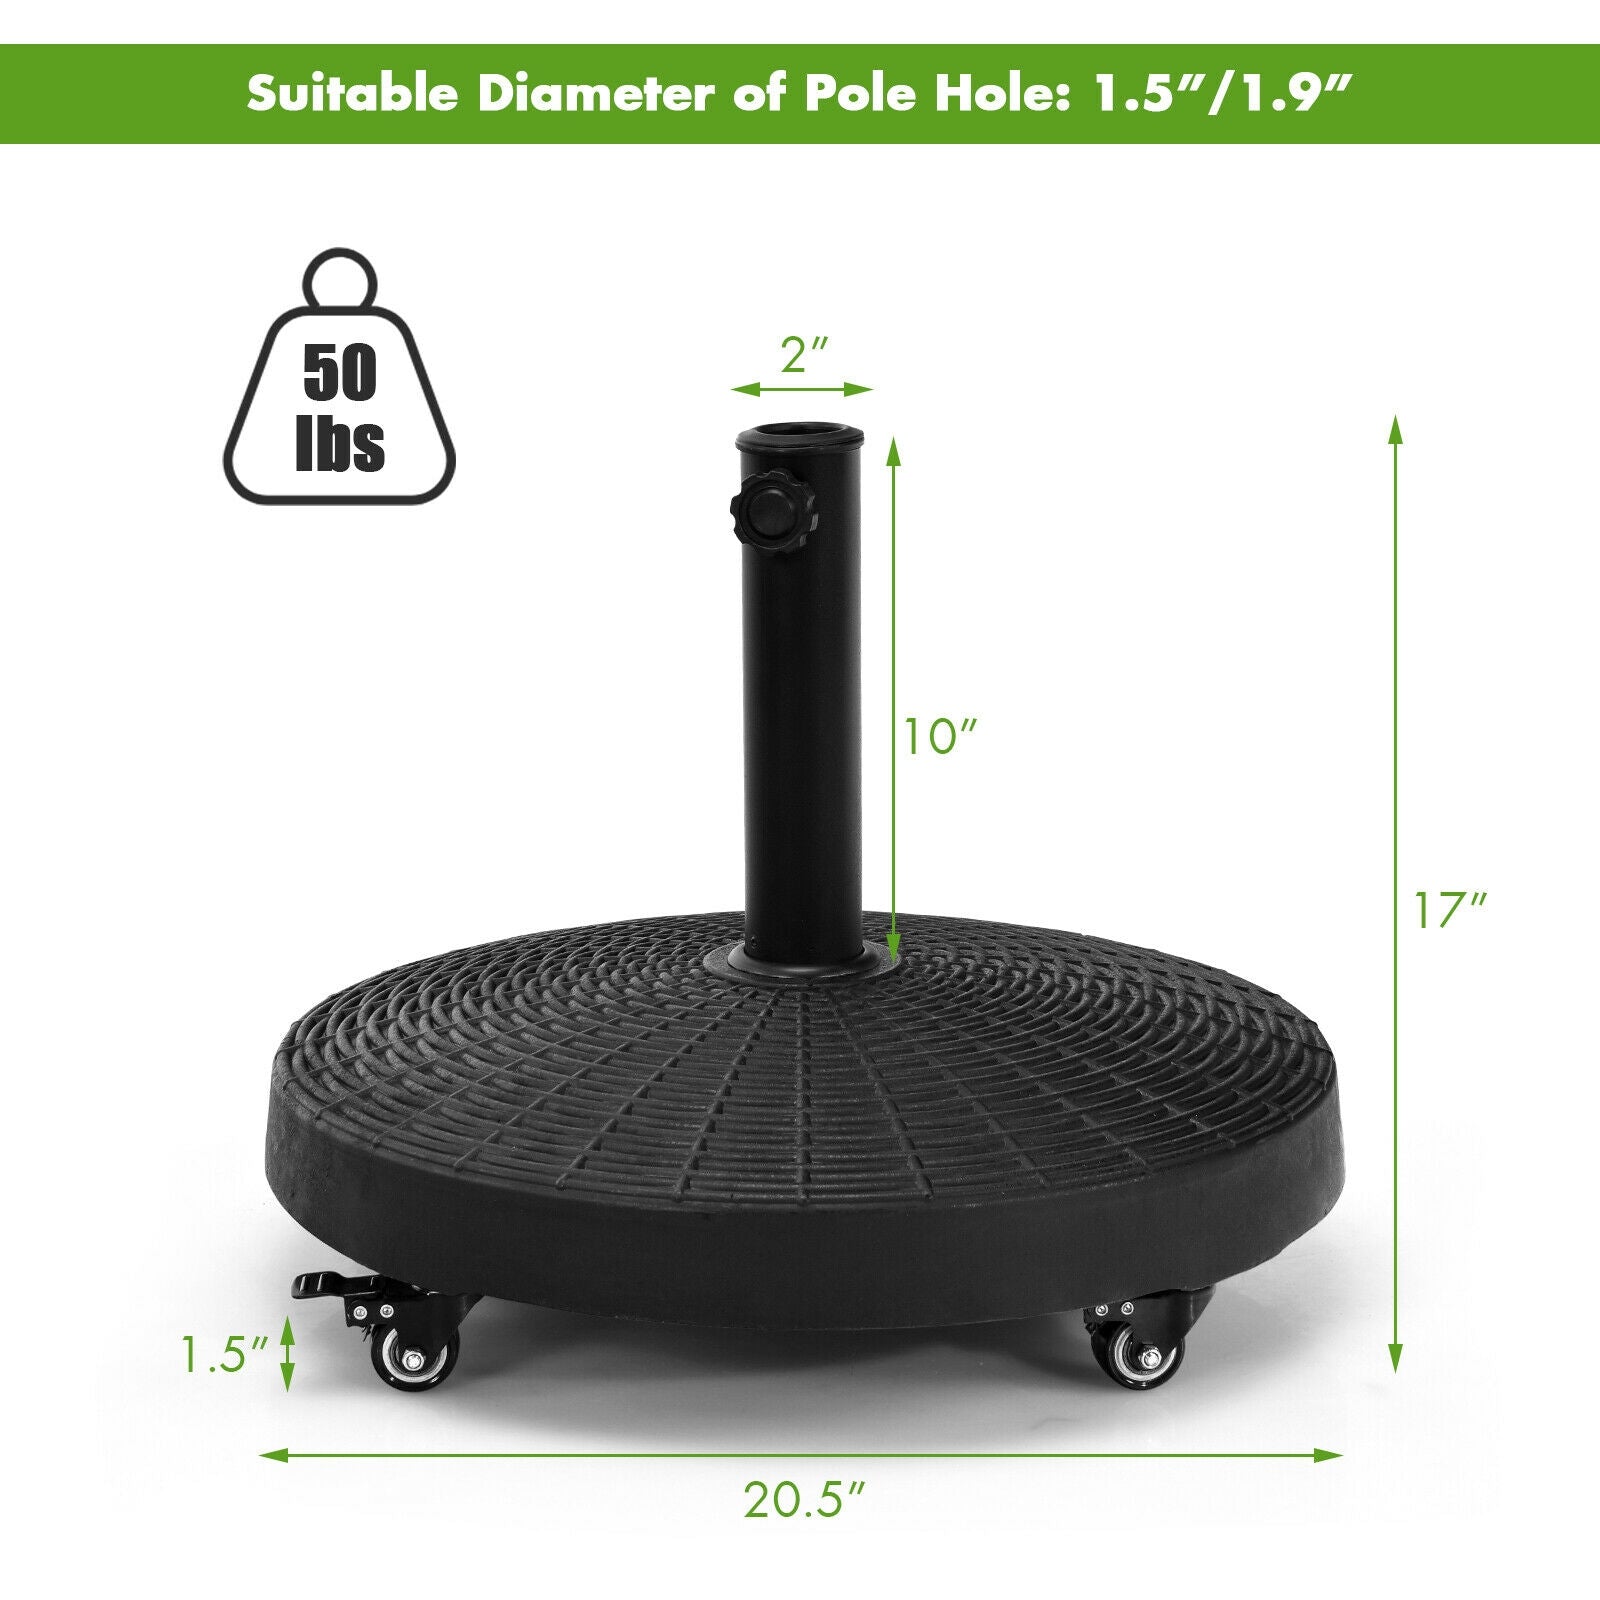 Adjustable Pole Sizes: The umbrella base features two removable plastic inserts on the top of the steel pole, accommodating both 1.5" and 1.9" diameter umbrella poles. This makes it compatible with most standard patio umbrellas available in the market. One base is sufficient to support umbrellas of different sizes.